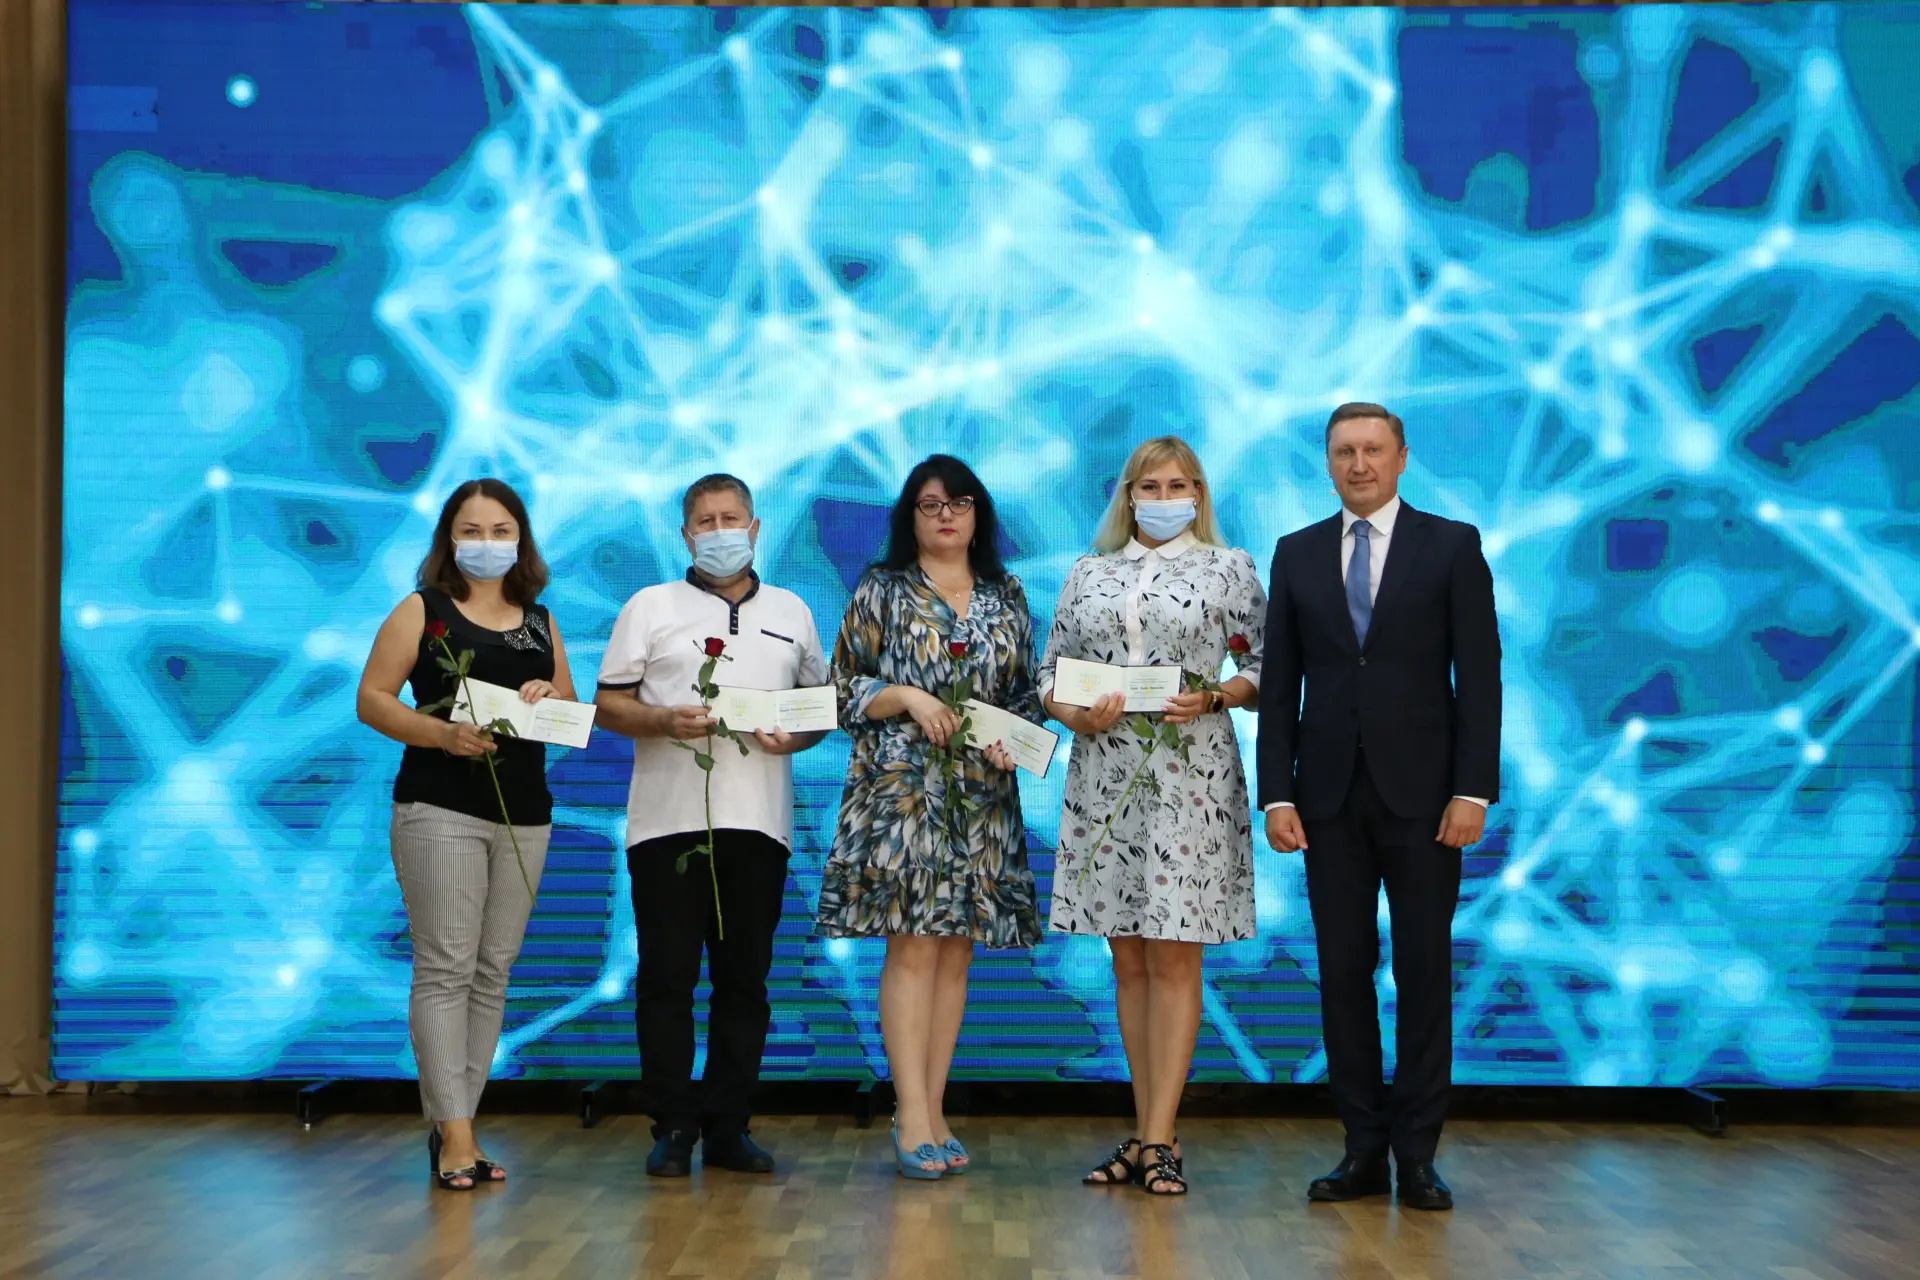 Scientific and pedagogical staff receives certificates with academic title and diplomas